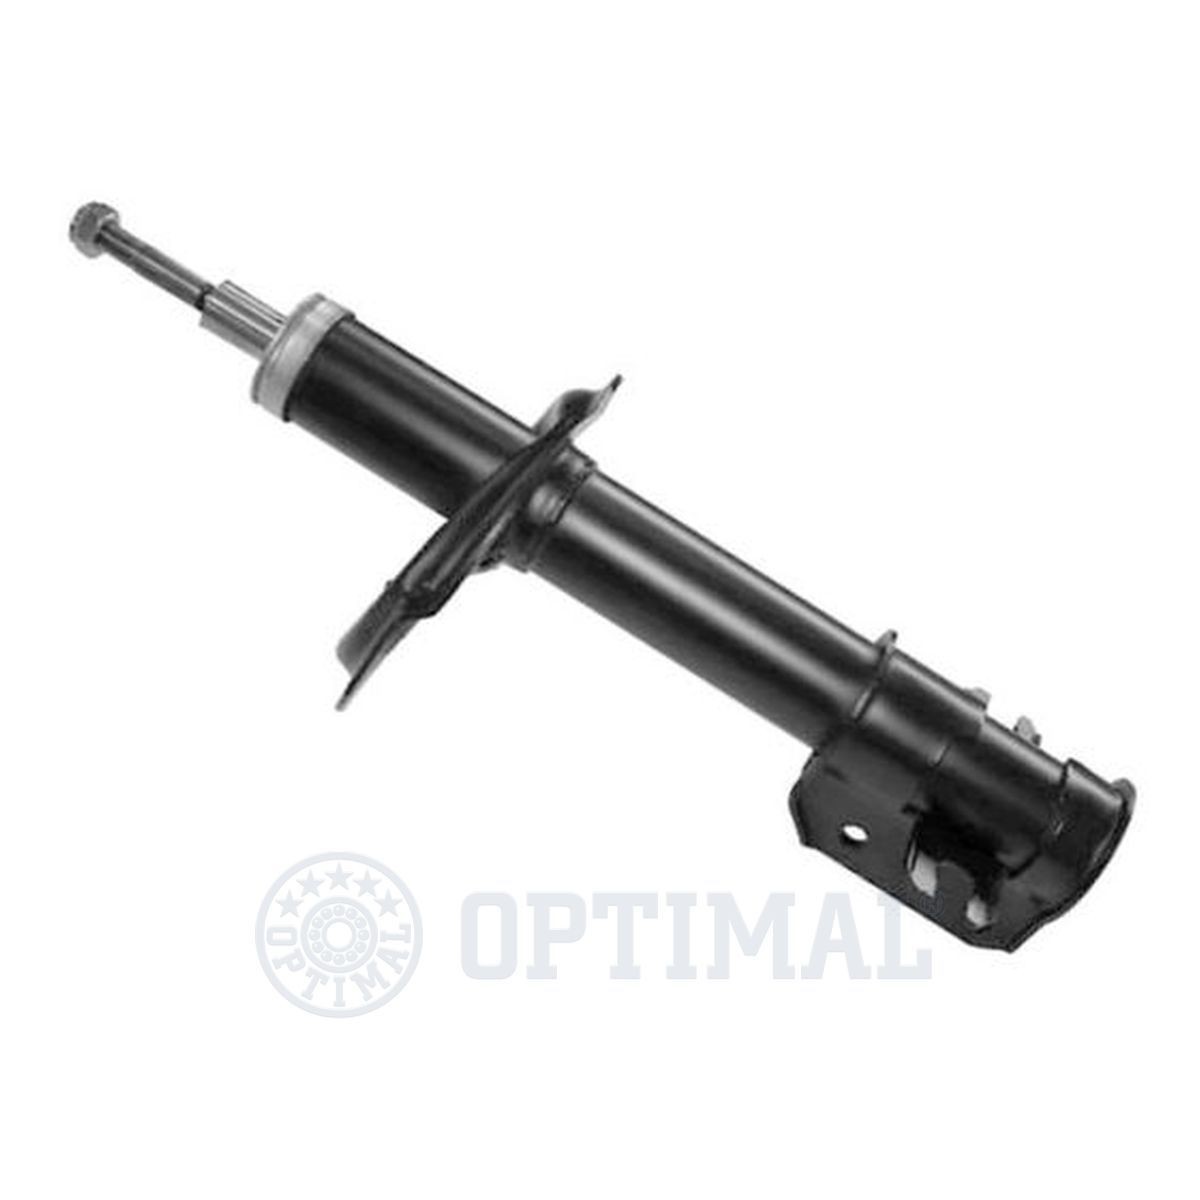 OPTIMAL A-3011G Shock absorber Front Axle, Gas Pressure, Twin-Tube, Suspension Strut, Spring-bearing Damper, Top pin, Bottom Clamp